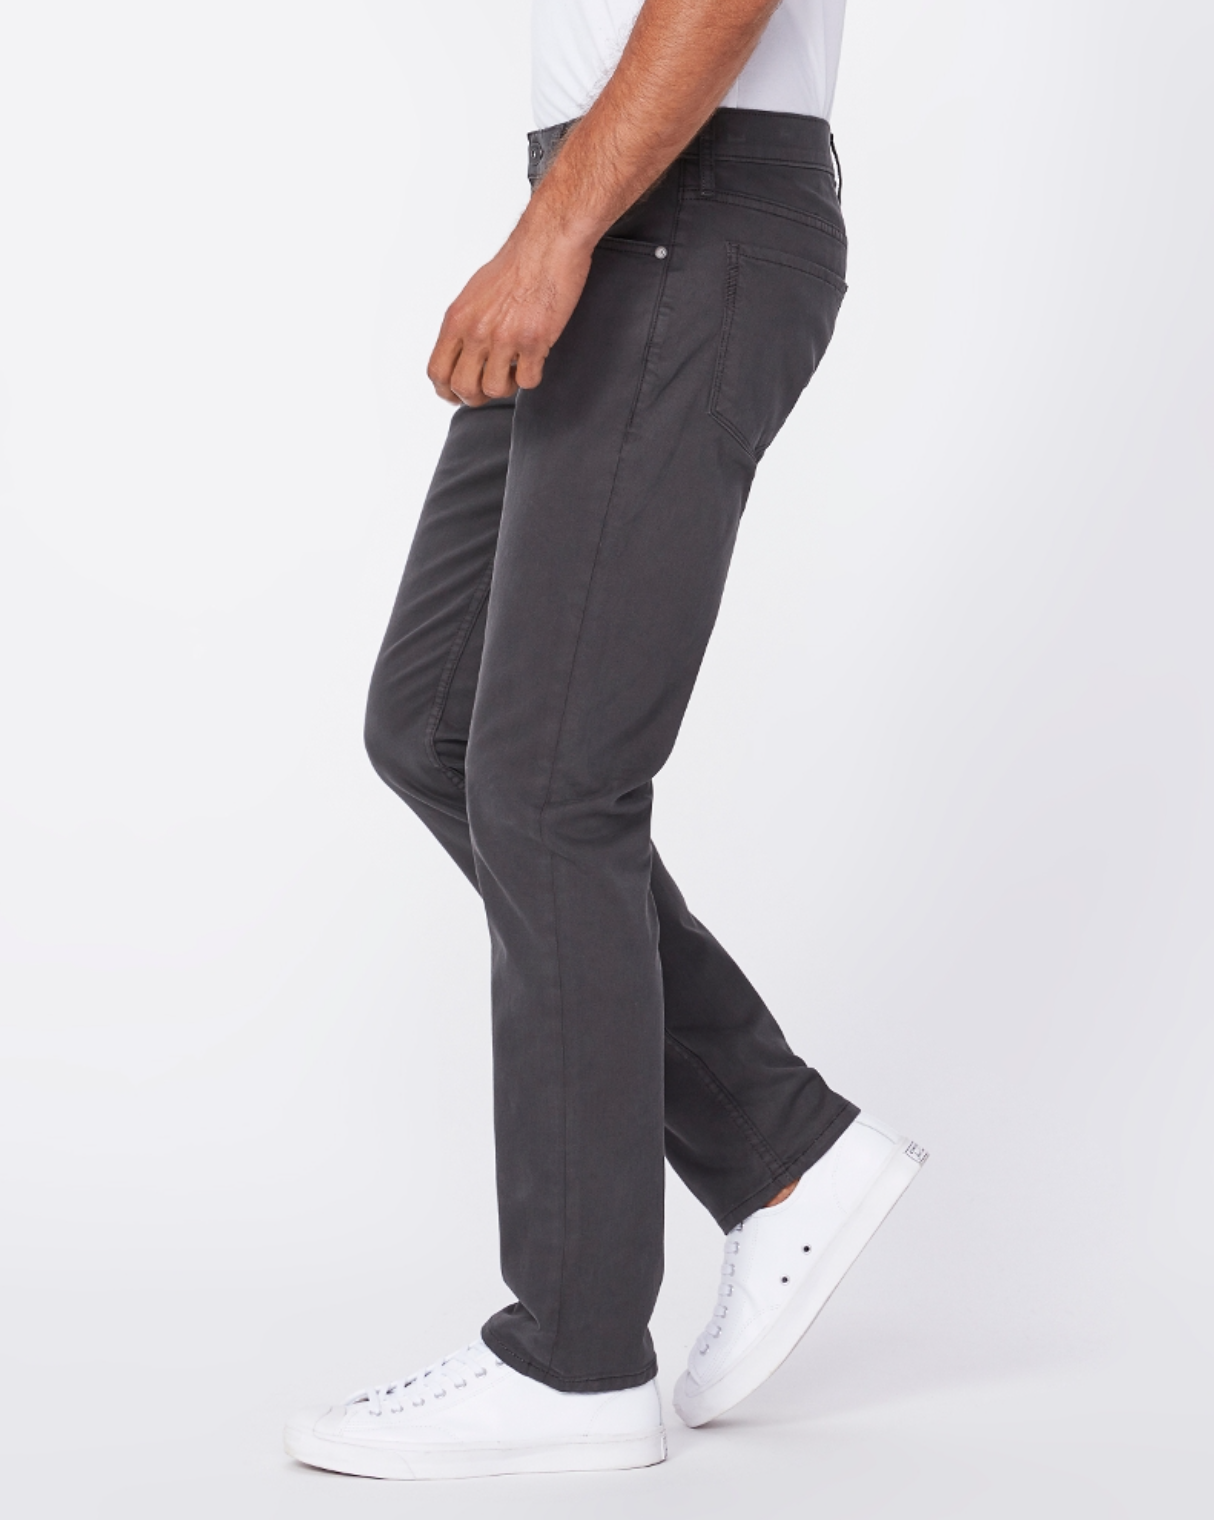 waist down side view of the lennox skinny fit twill pant from paige, in grey